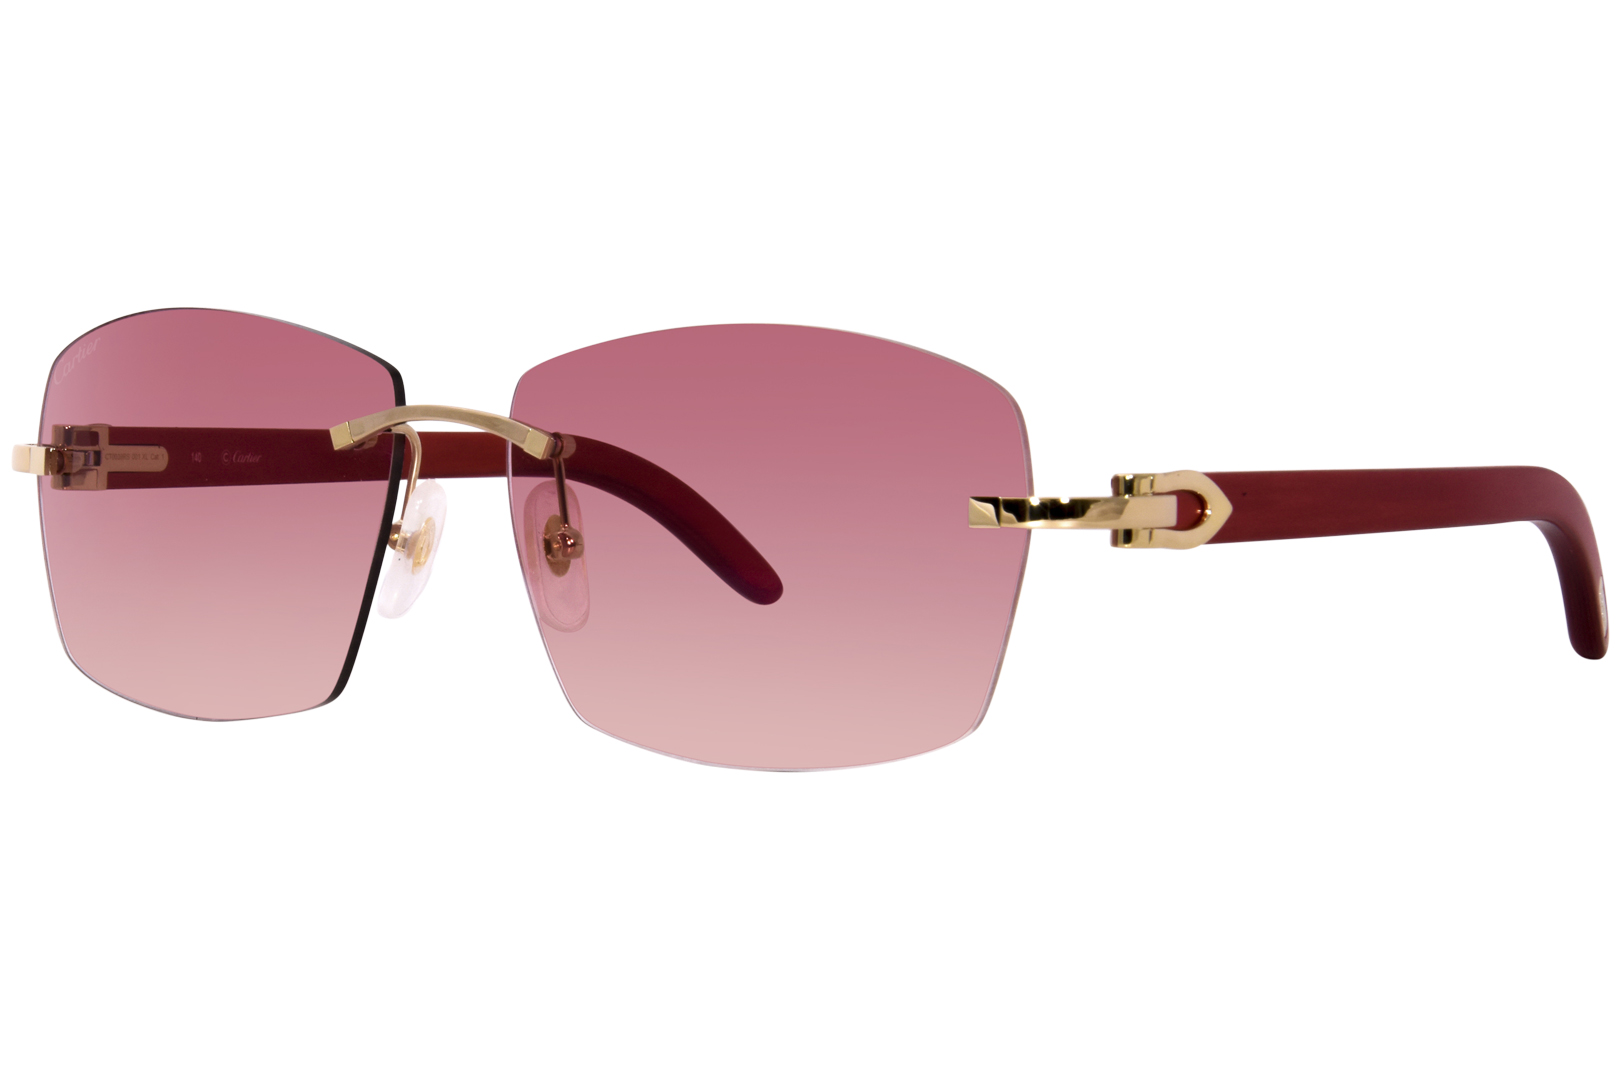 Cartier CT0039RS 001 Sunglasses Wood Gold/Red 58-15-140 | EyeSpecs.com